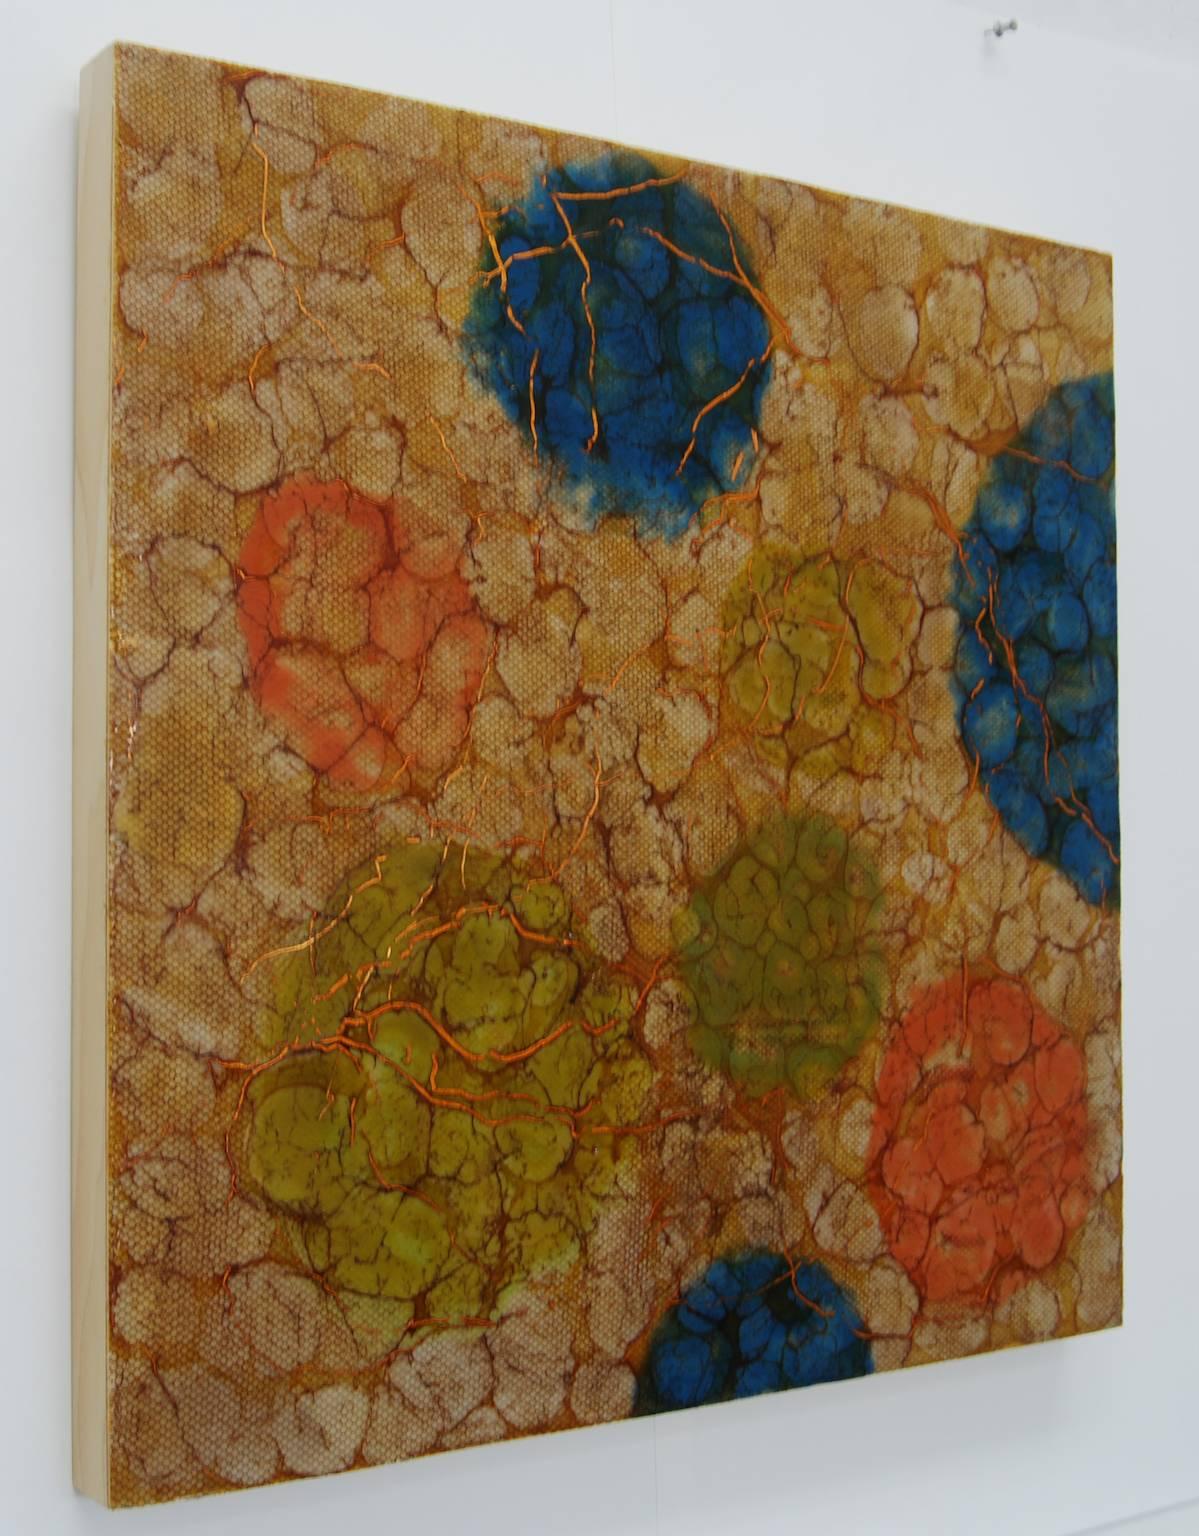 Kay Hartung's “Macrocell 1” is a richly patterned painting in colors of amber, blue and orange. She embeds fabric netting into the encaustic layers creating a webbed effect. The painting is 24 x 24 inches on birch panel. 

Kay Hartung is an artist